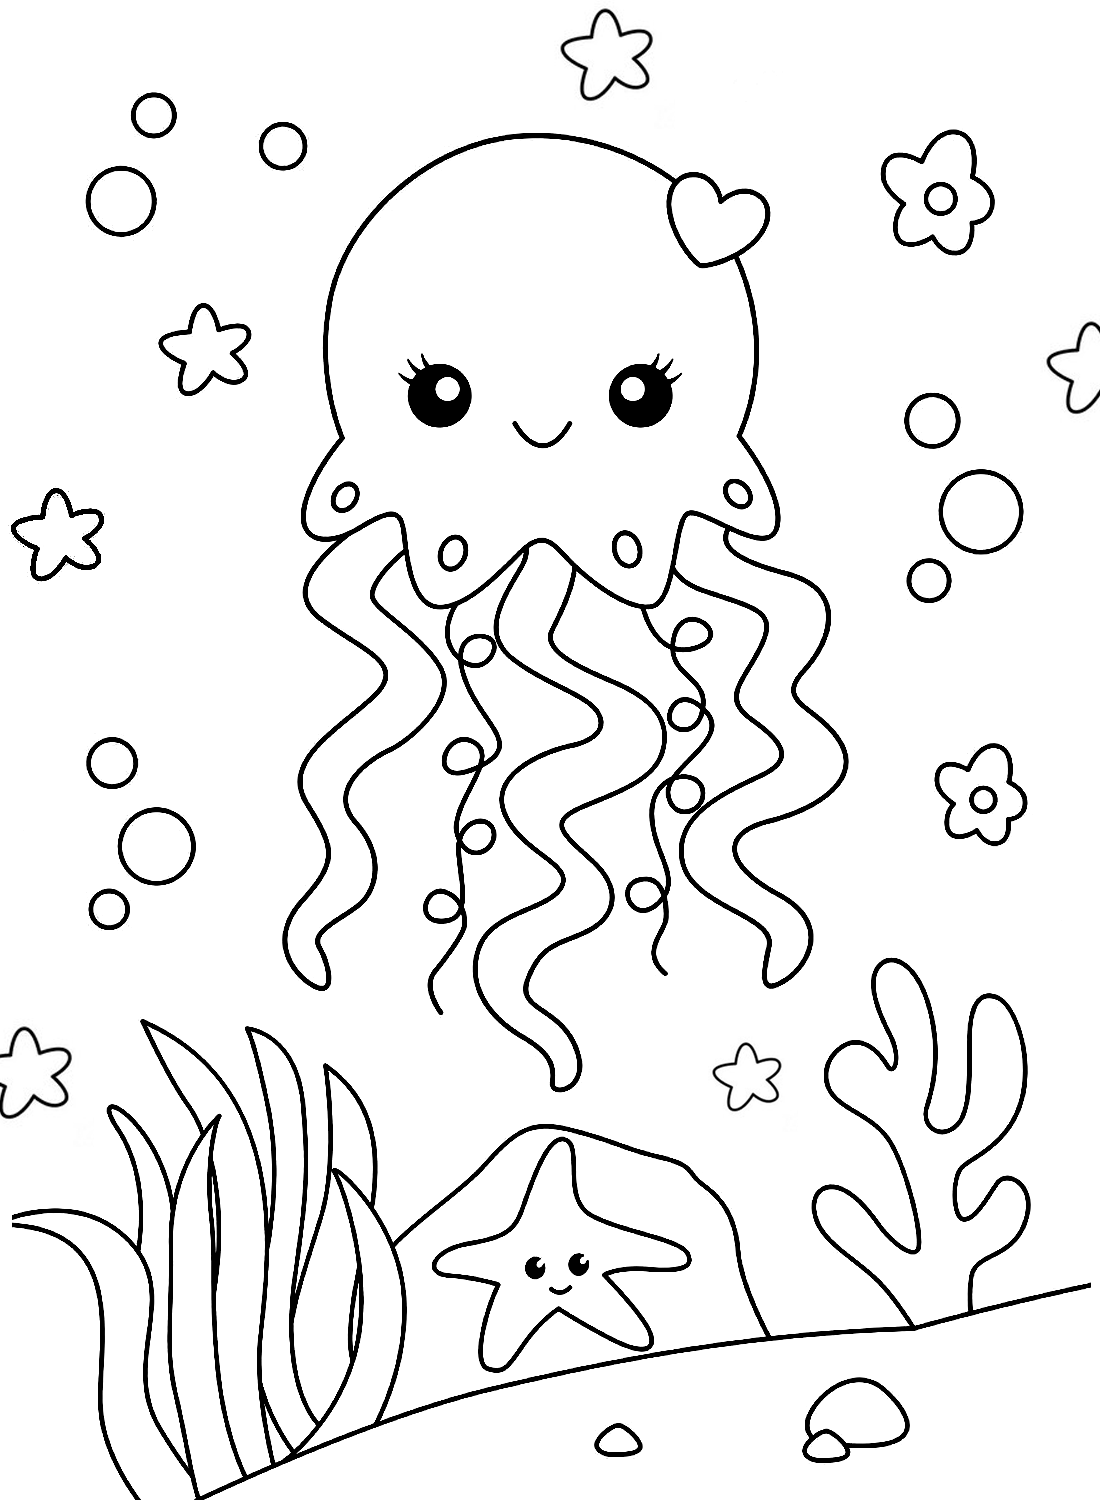 The Jellyfish Coloring Page